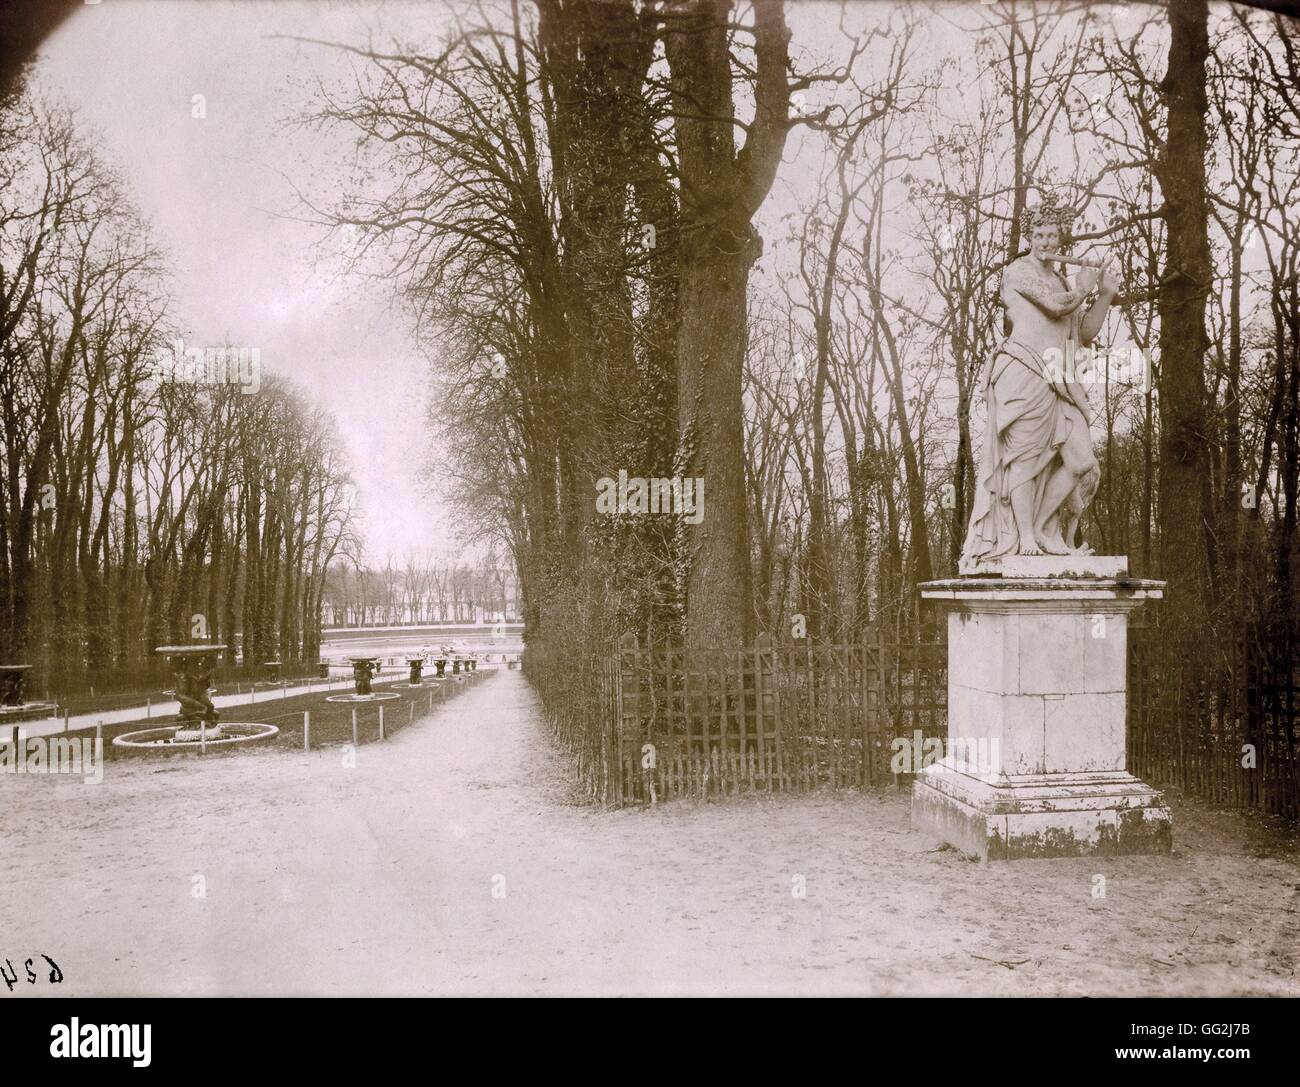 Eugène Atget The Allée d'eau in the Park of Versailles c.1900 Albumen print after glass-plate negative Private collection Stock Photo